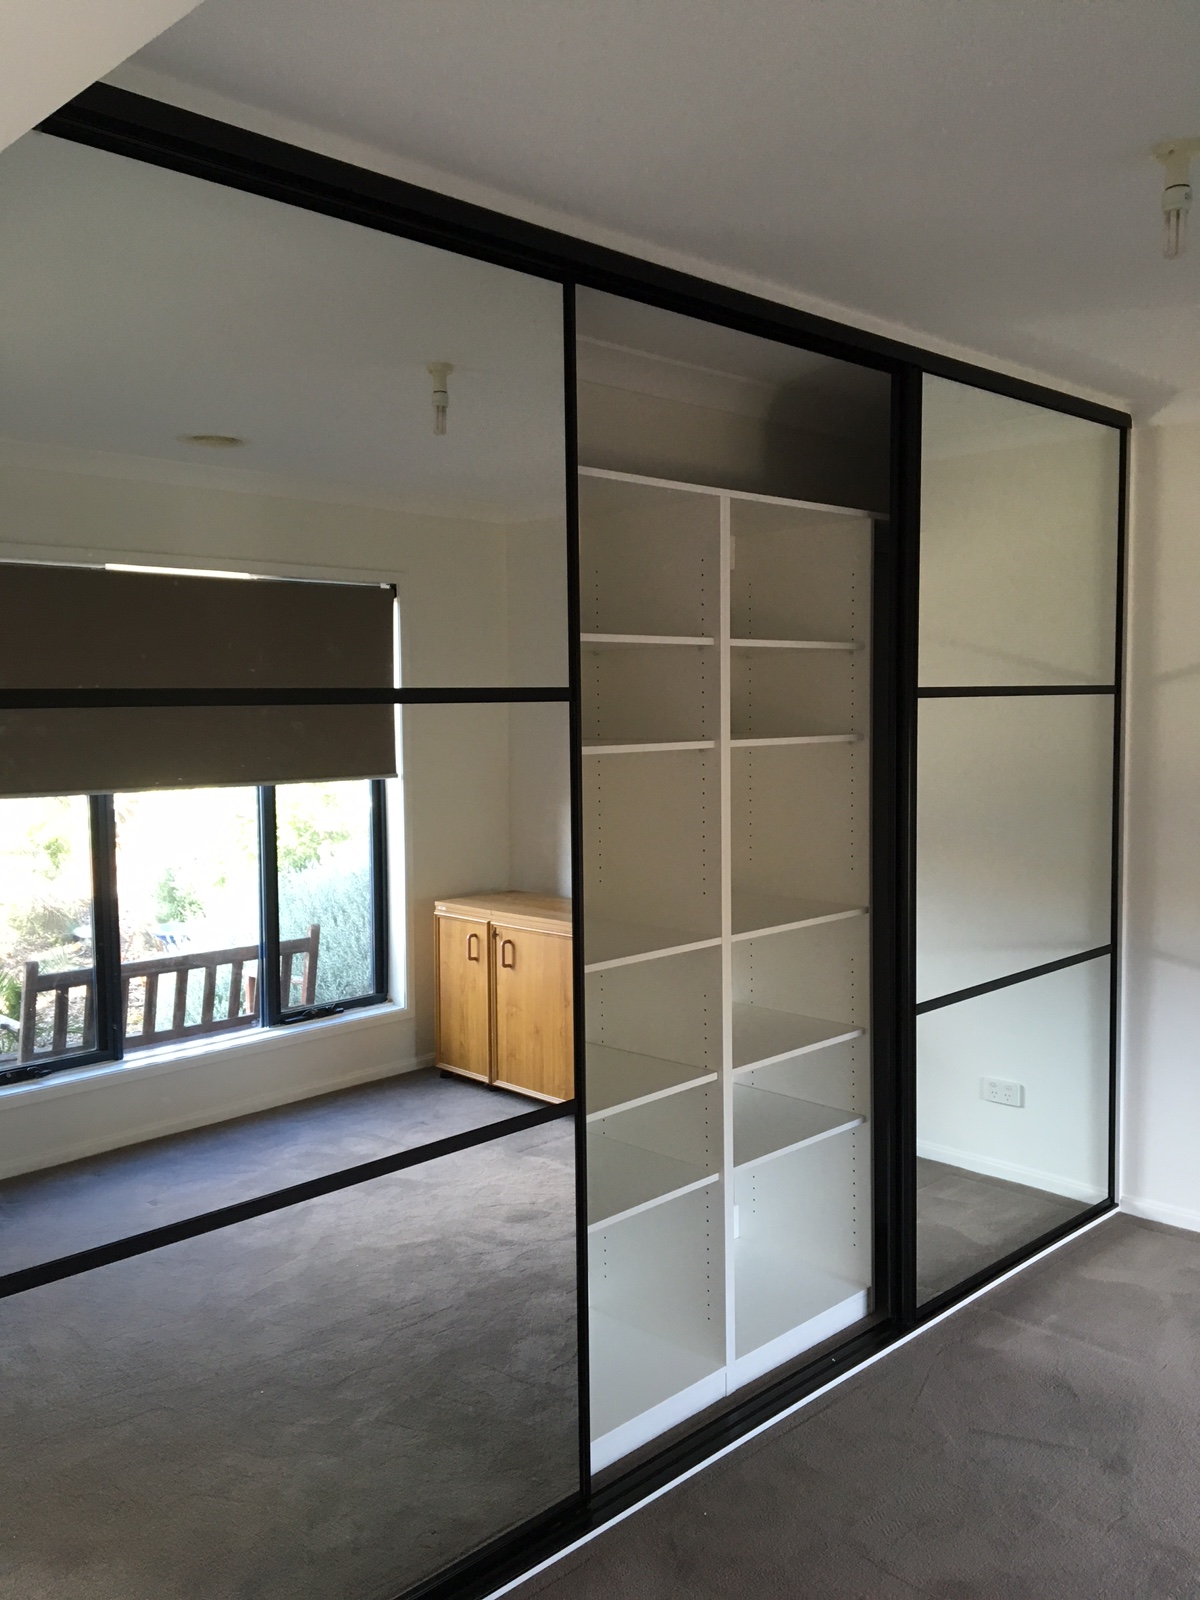 Door Wardrobe Wardrobe Mirror Doors  : Antibes 6 Door Hinged Wardrobe 4 Mirror Doors Finish All Bedroom Ranges Fishpools / So no matter what your budget or taste, we have something for you.